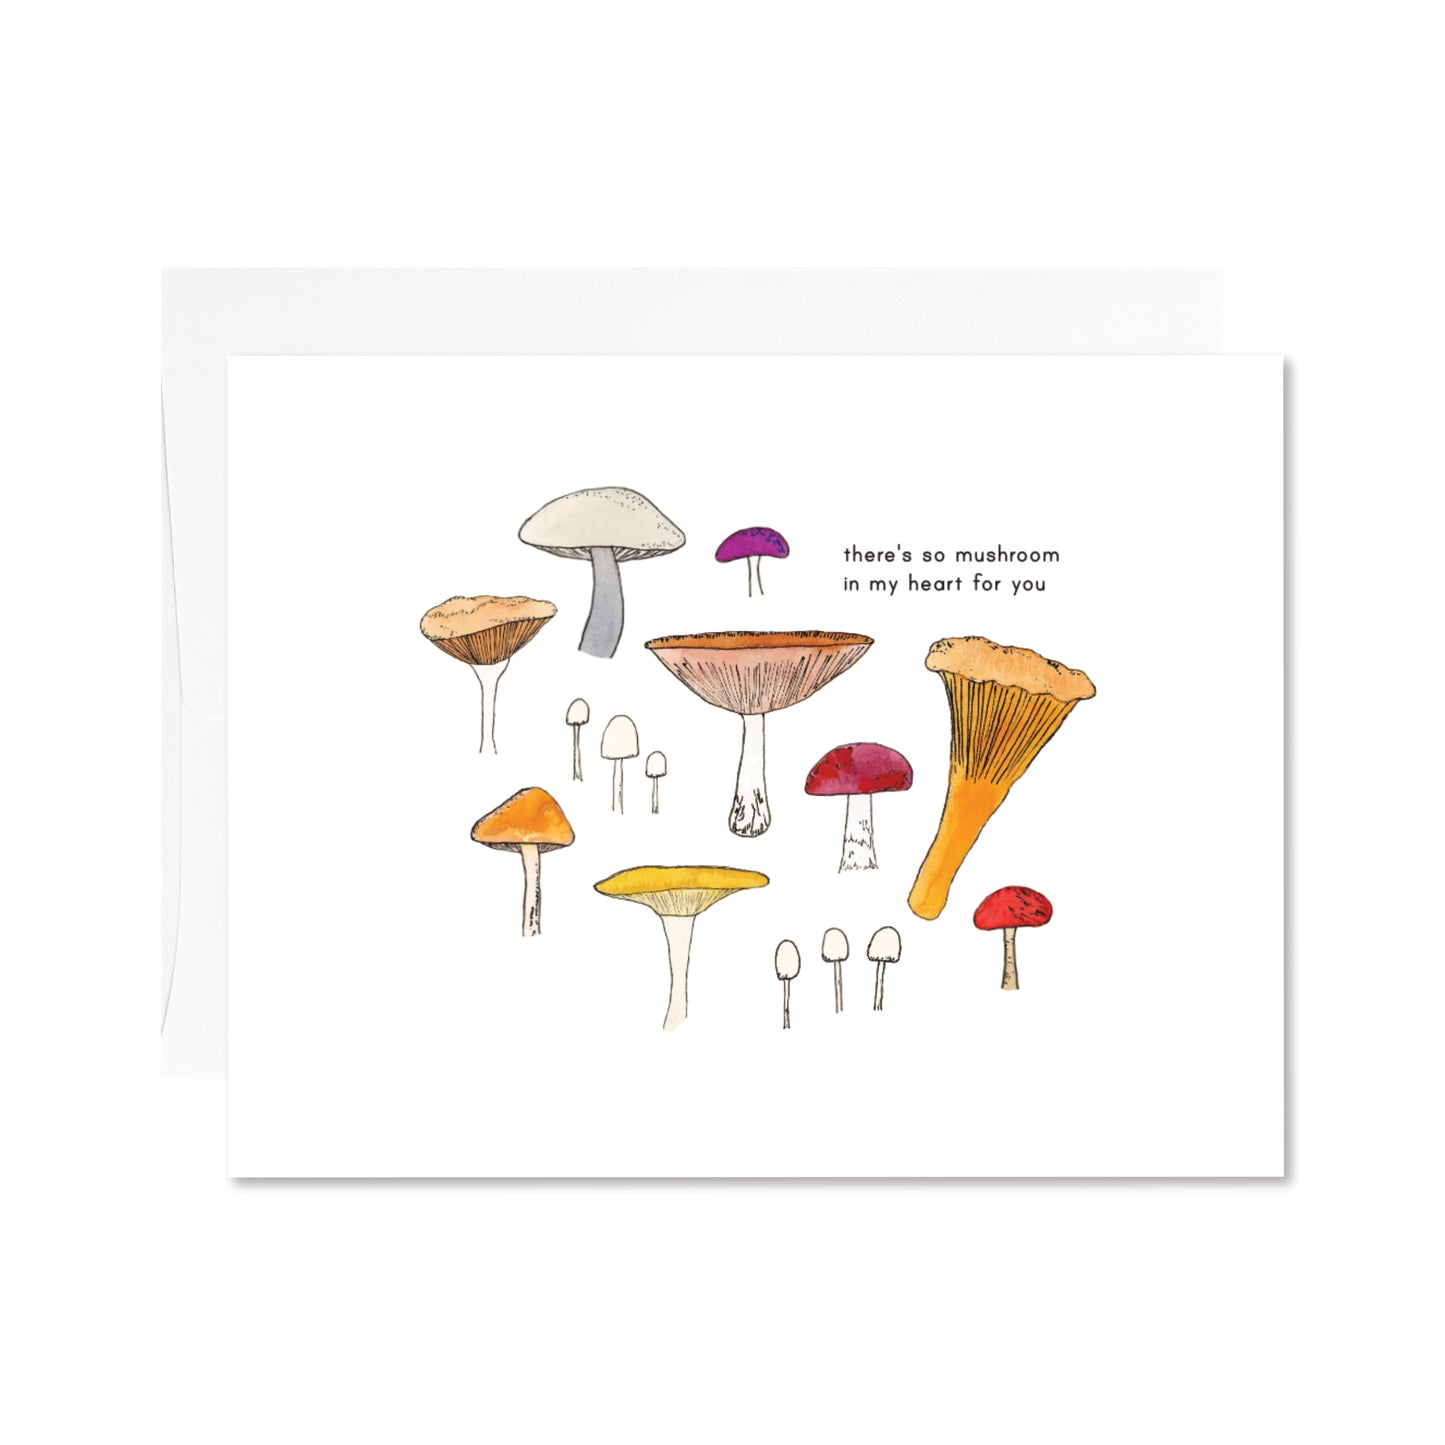 Mushroom Card - "There's So Mushroom in My Heart for You"